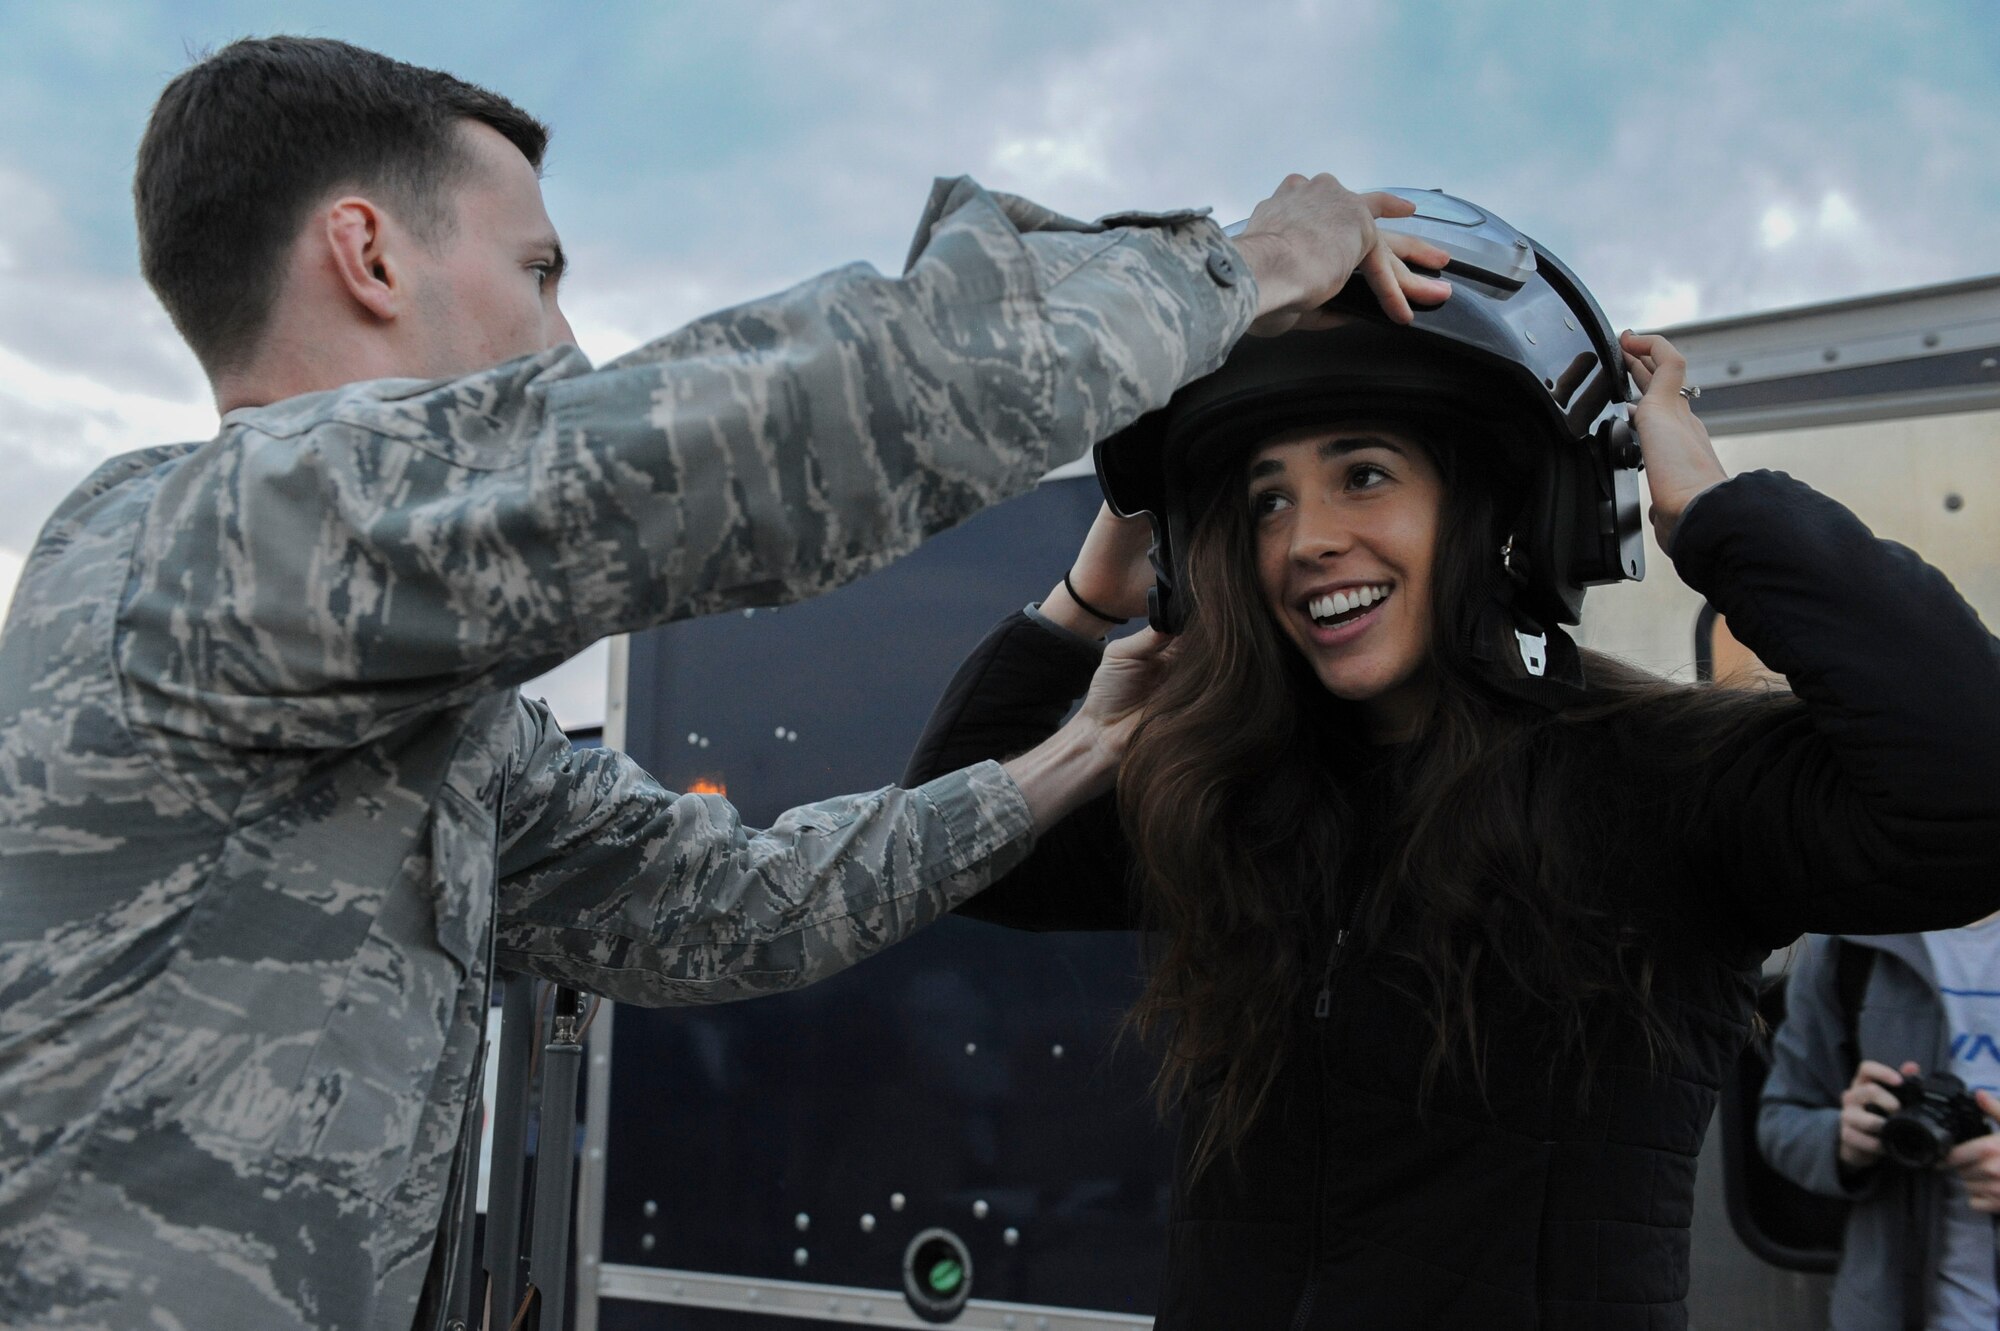 U.S. Air Force Senior Airman Alex Johnson, a 39th Civil Engineer Squadron explosive ordnance disposal journeyman, helps Four-time Olympic medalist Maya DiRado put on a bomb suit helmet Dec. 5, 2016, at Incirlik Air Base, Turkey. DiRado was one of the USO entertainers that accompanied U.S. Marine Corps Gen. Joseph F. Dunford, Jr., chairman of the Joint Chiefs of Staff, on the 2016 USO Holiday Visit. (U.S. Air Force photo by Airman 1st Class Devin M. Rumbaugh)